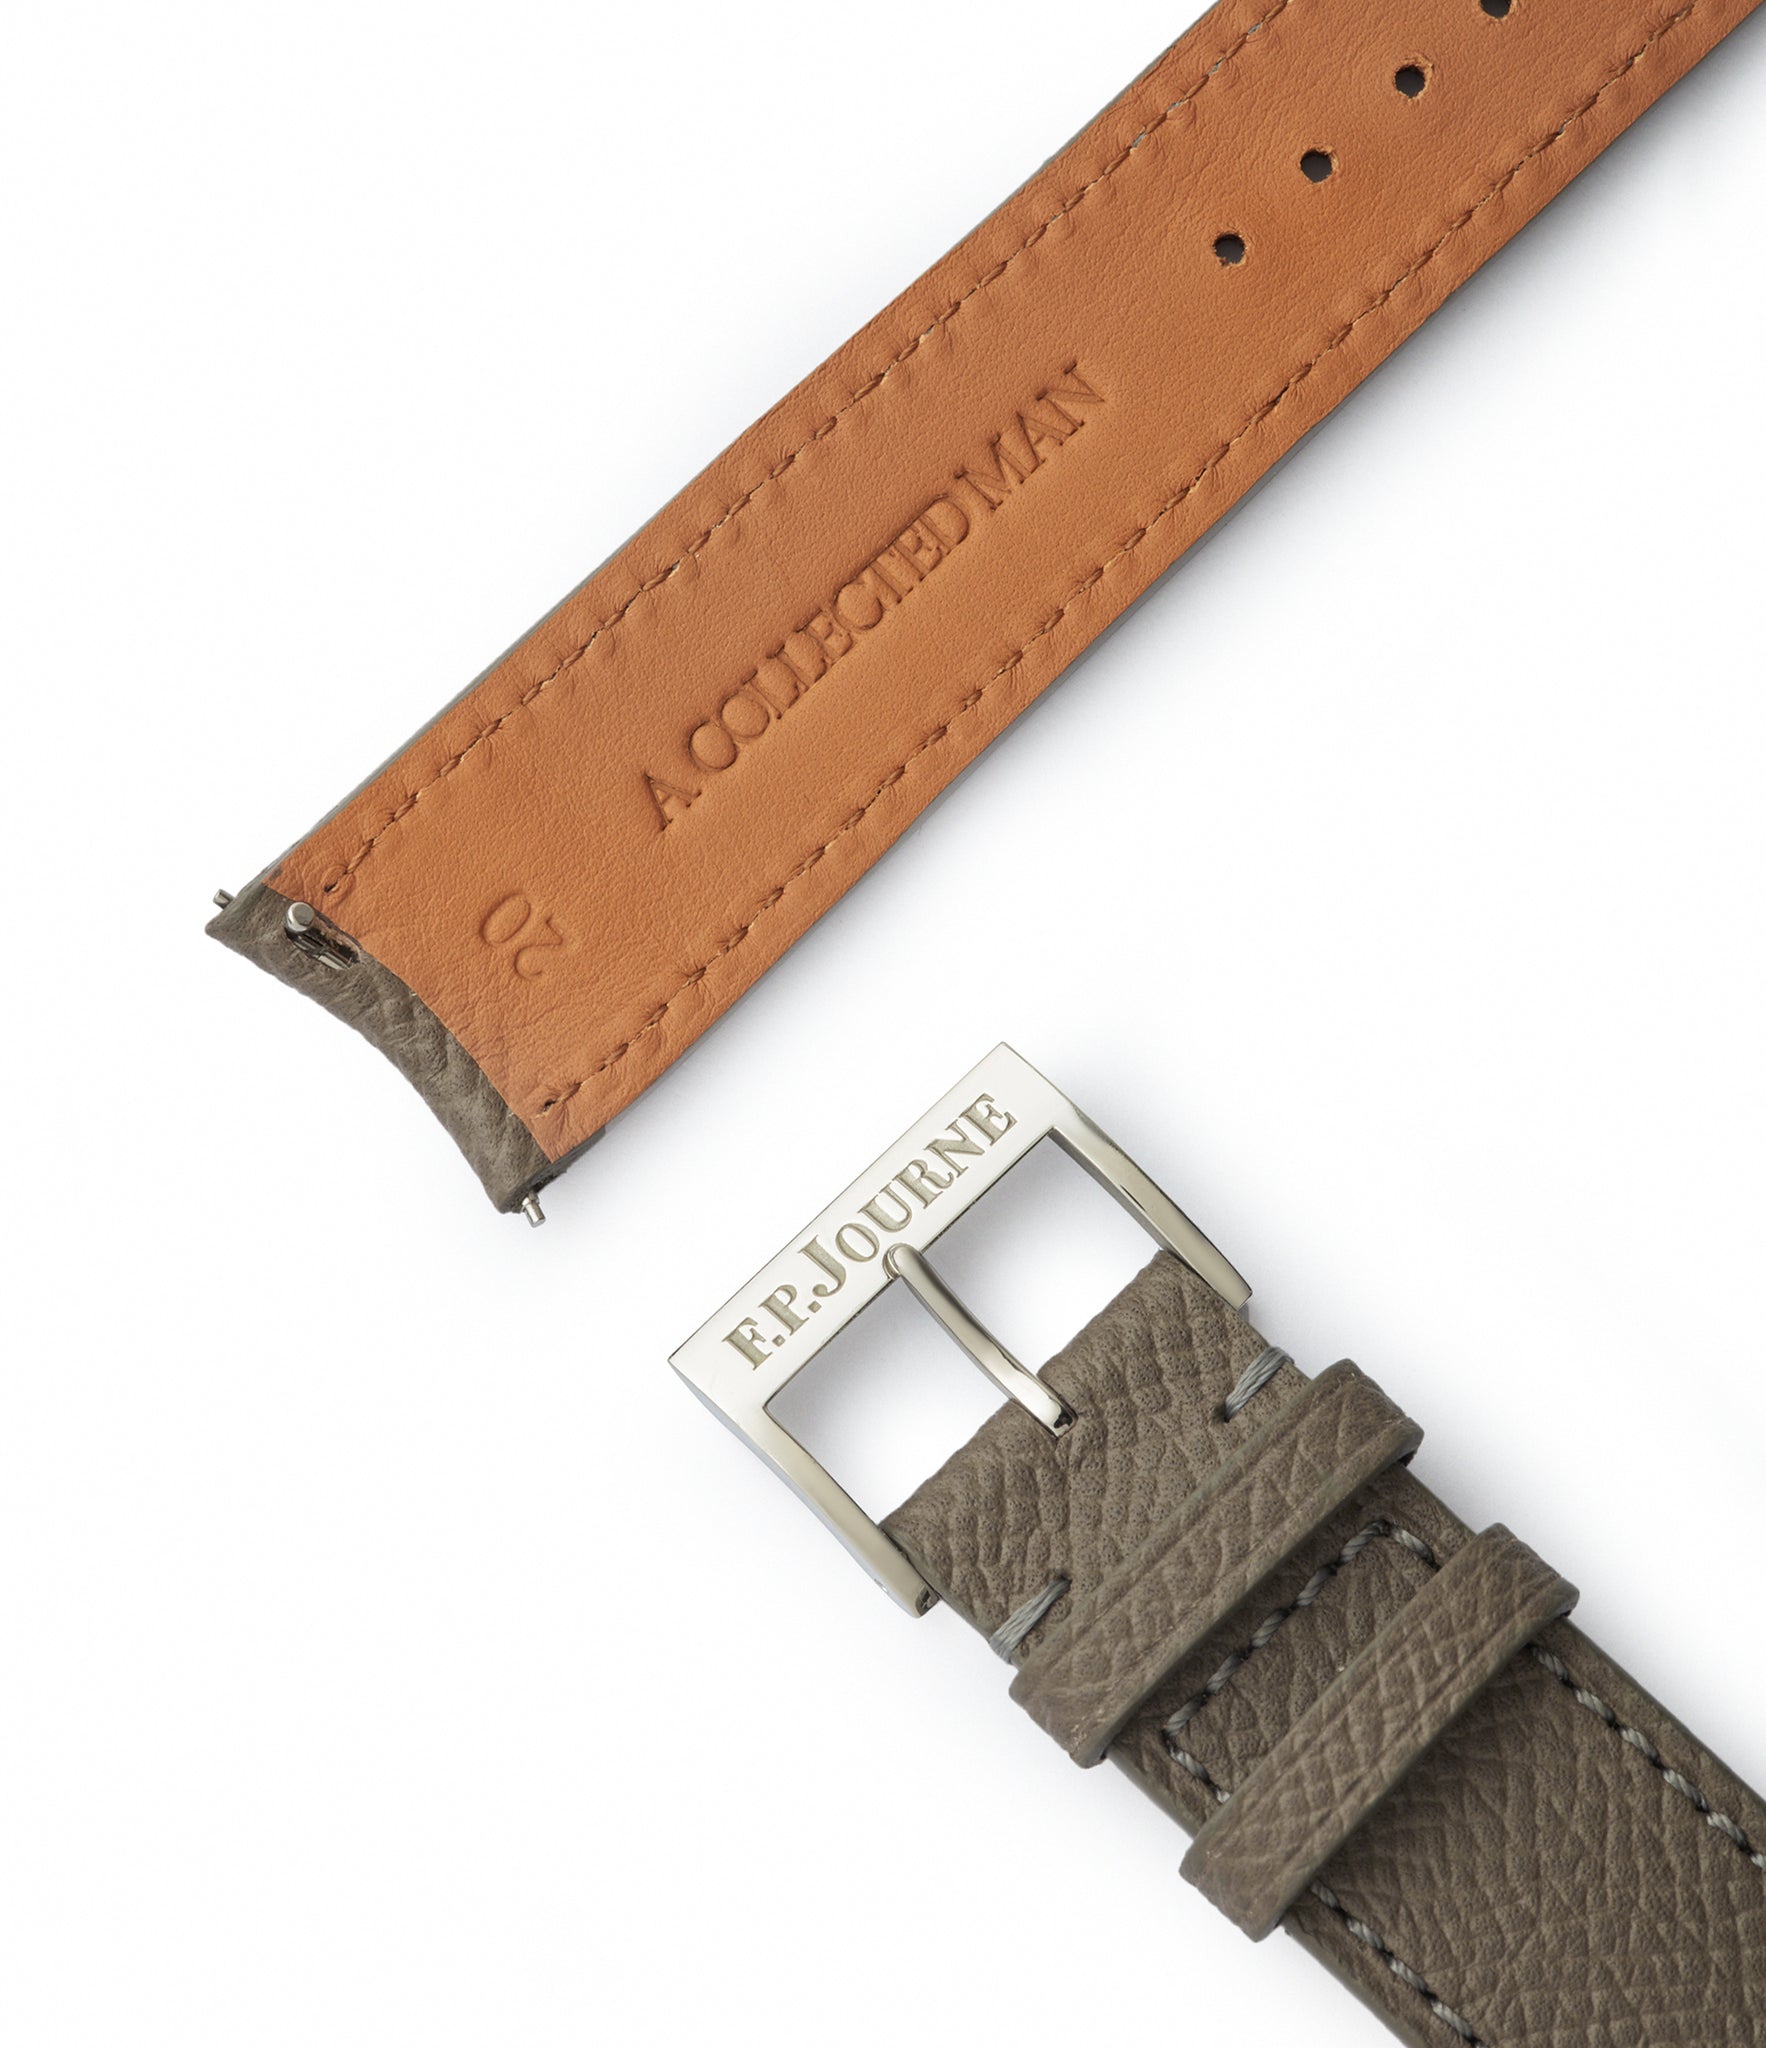 Buy 20mm x 19mm Stockholm Molequin F. P. Journe curved watch strap stone grey grained leather quick-release springbars buckle handcrafted European-made for sale online at A Collected Man London